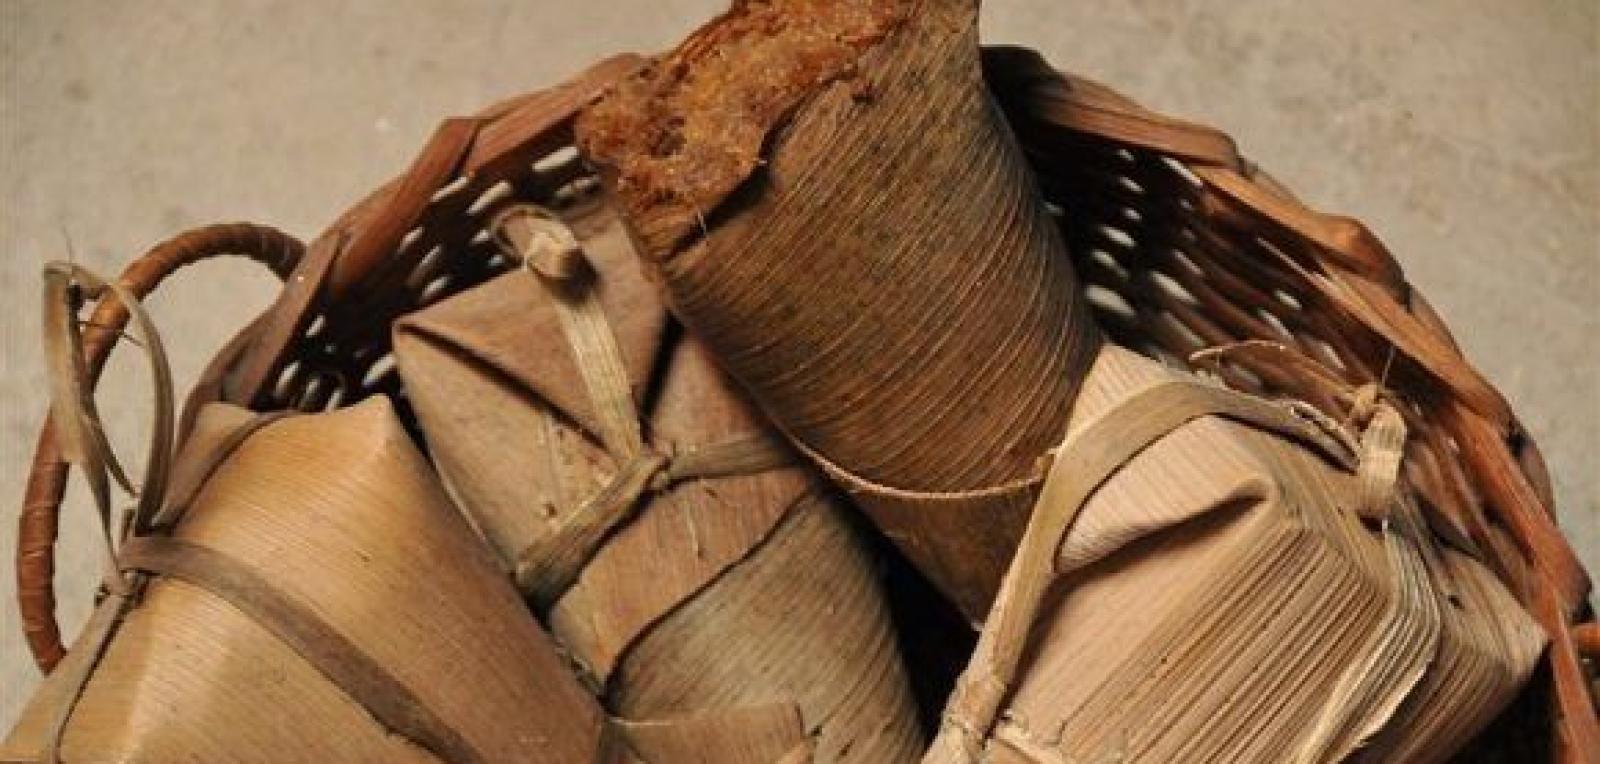 Delicacies and traditions of Baracoa